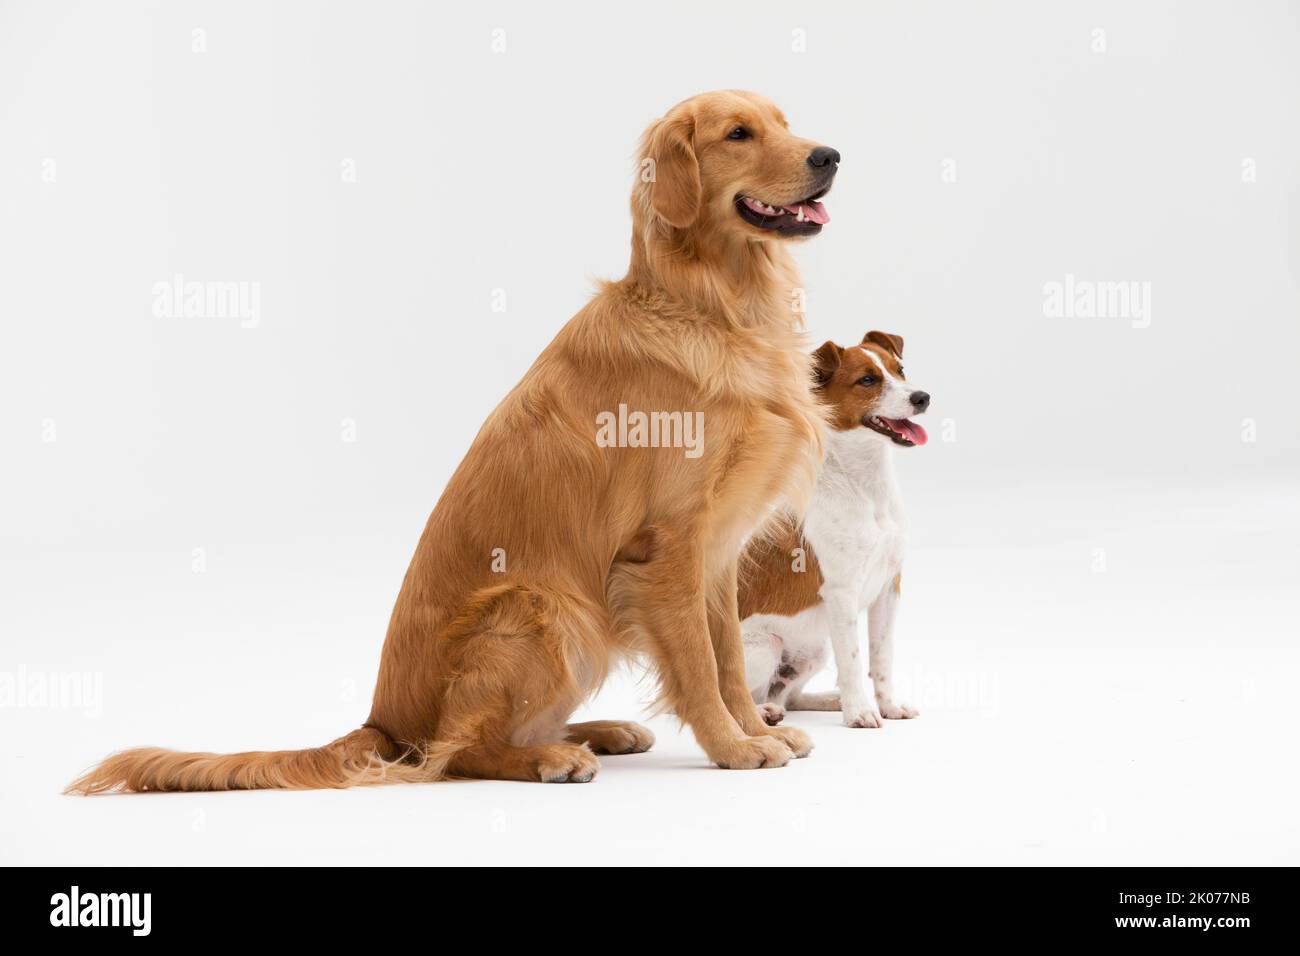 Two dogs photographed in studio with white background Stock Photo